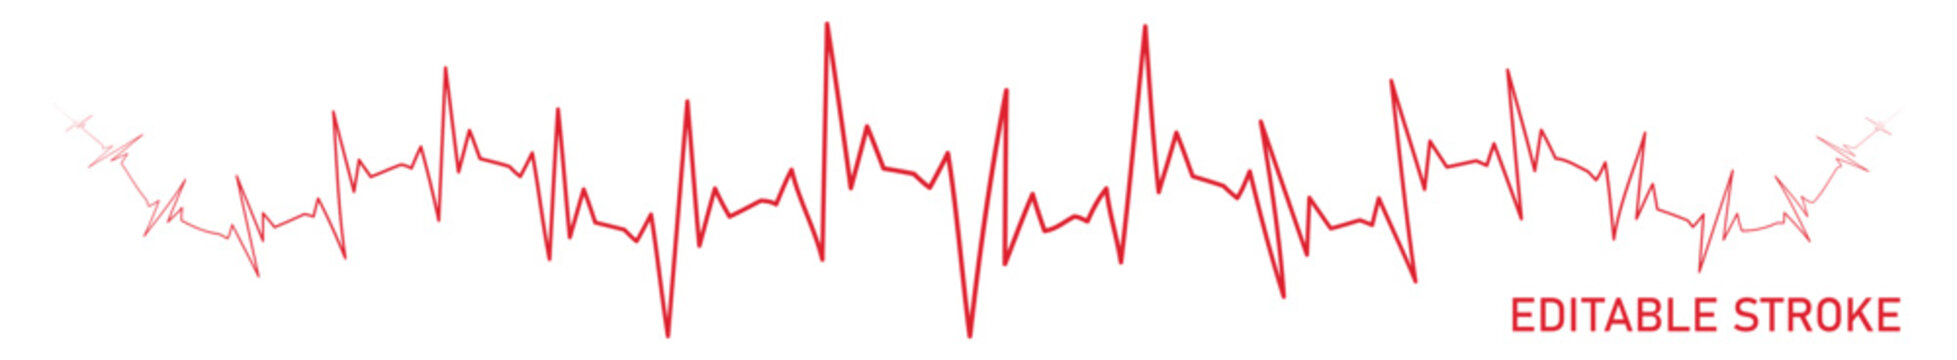 Editable stroke high heart rate ascending, descending, red EKG, cardiogram, heartbeat line vector design to use in healthcare, healthy lifestyle, medical laboratory, cardiology project. 